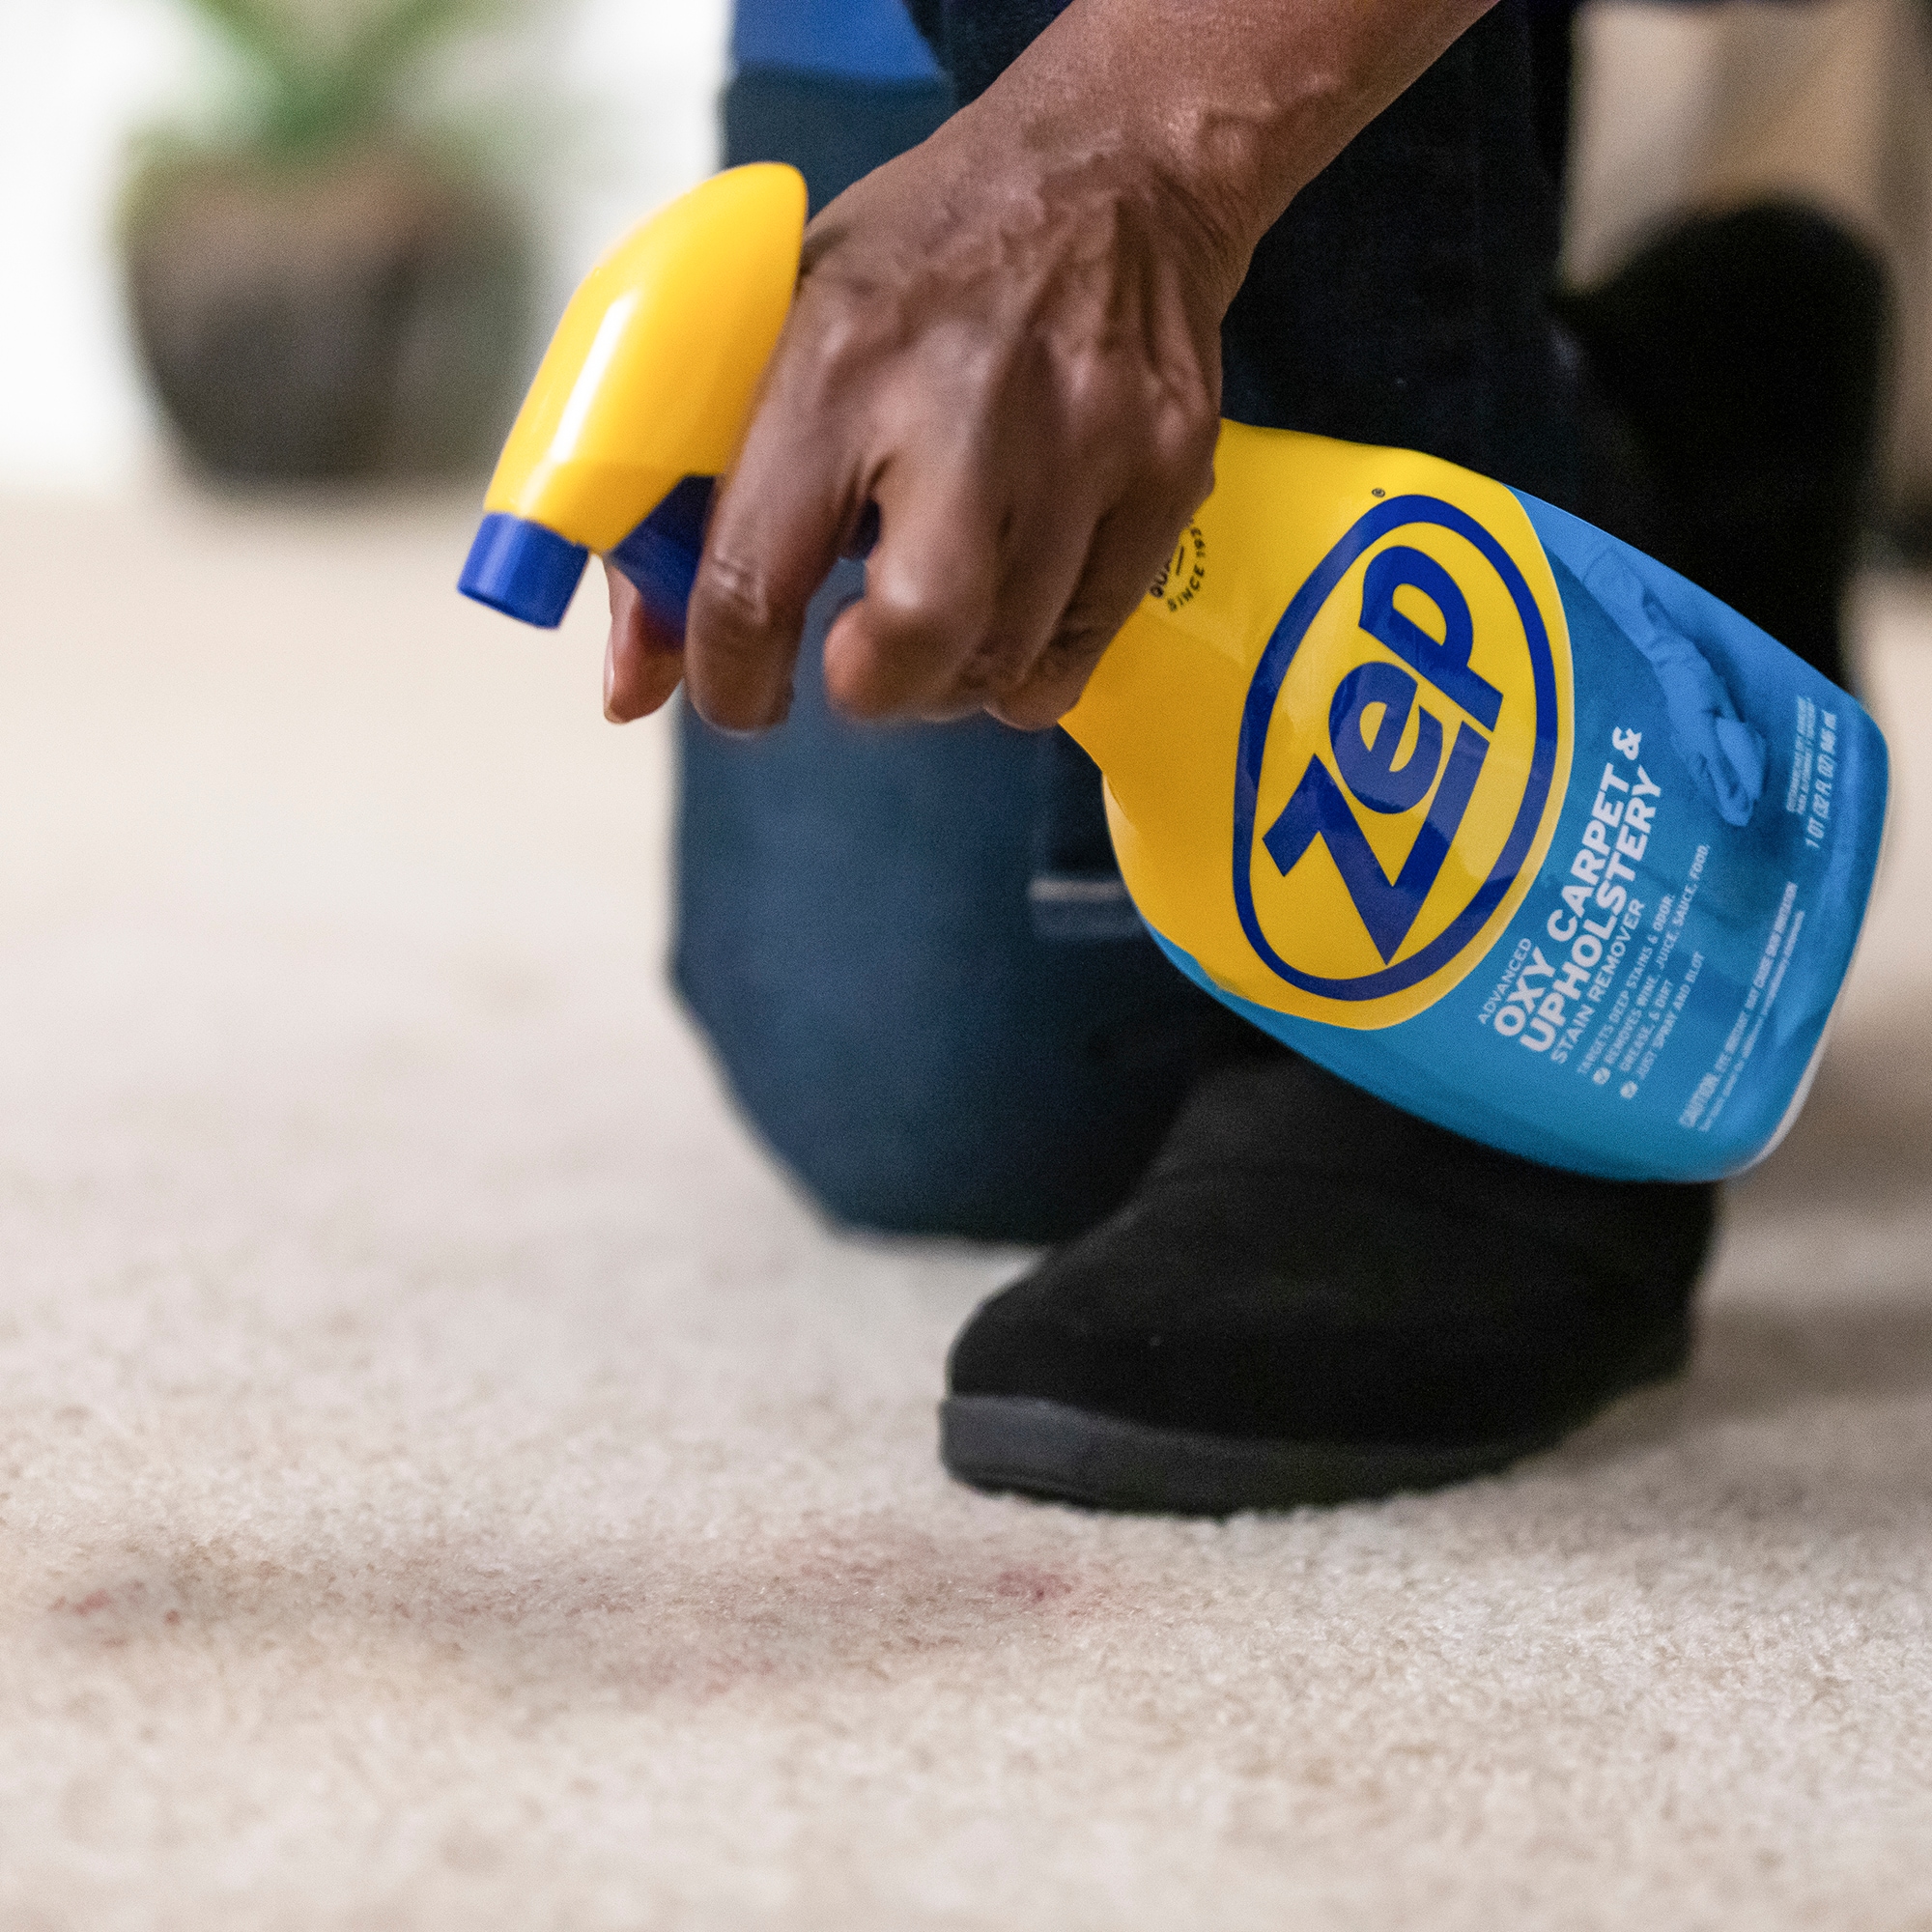 Best Buy: Woolite Oxy Deep Steam Pet Carpet and Upholstery Cleaner